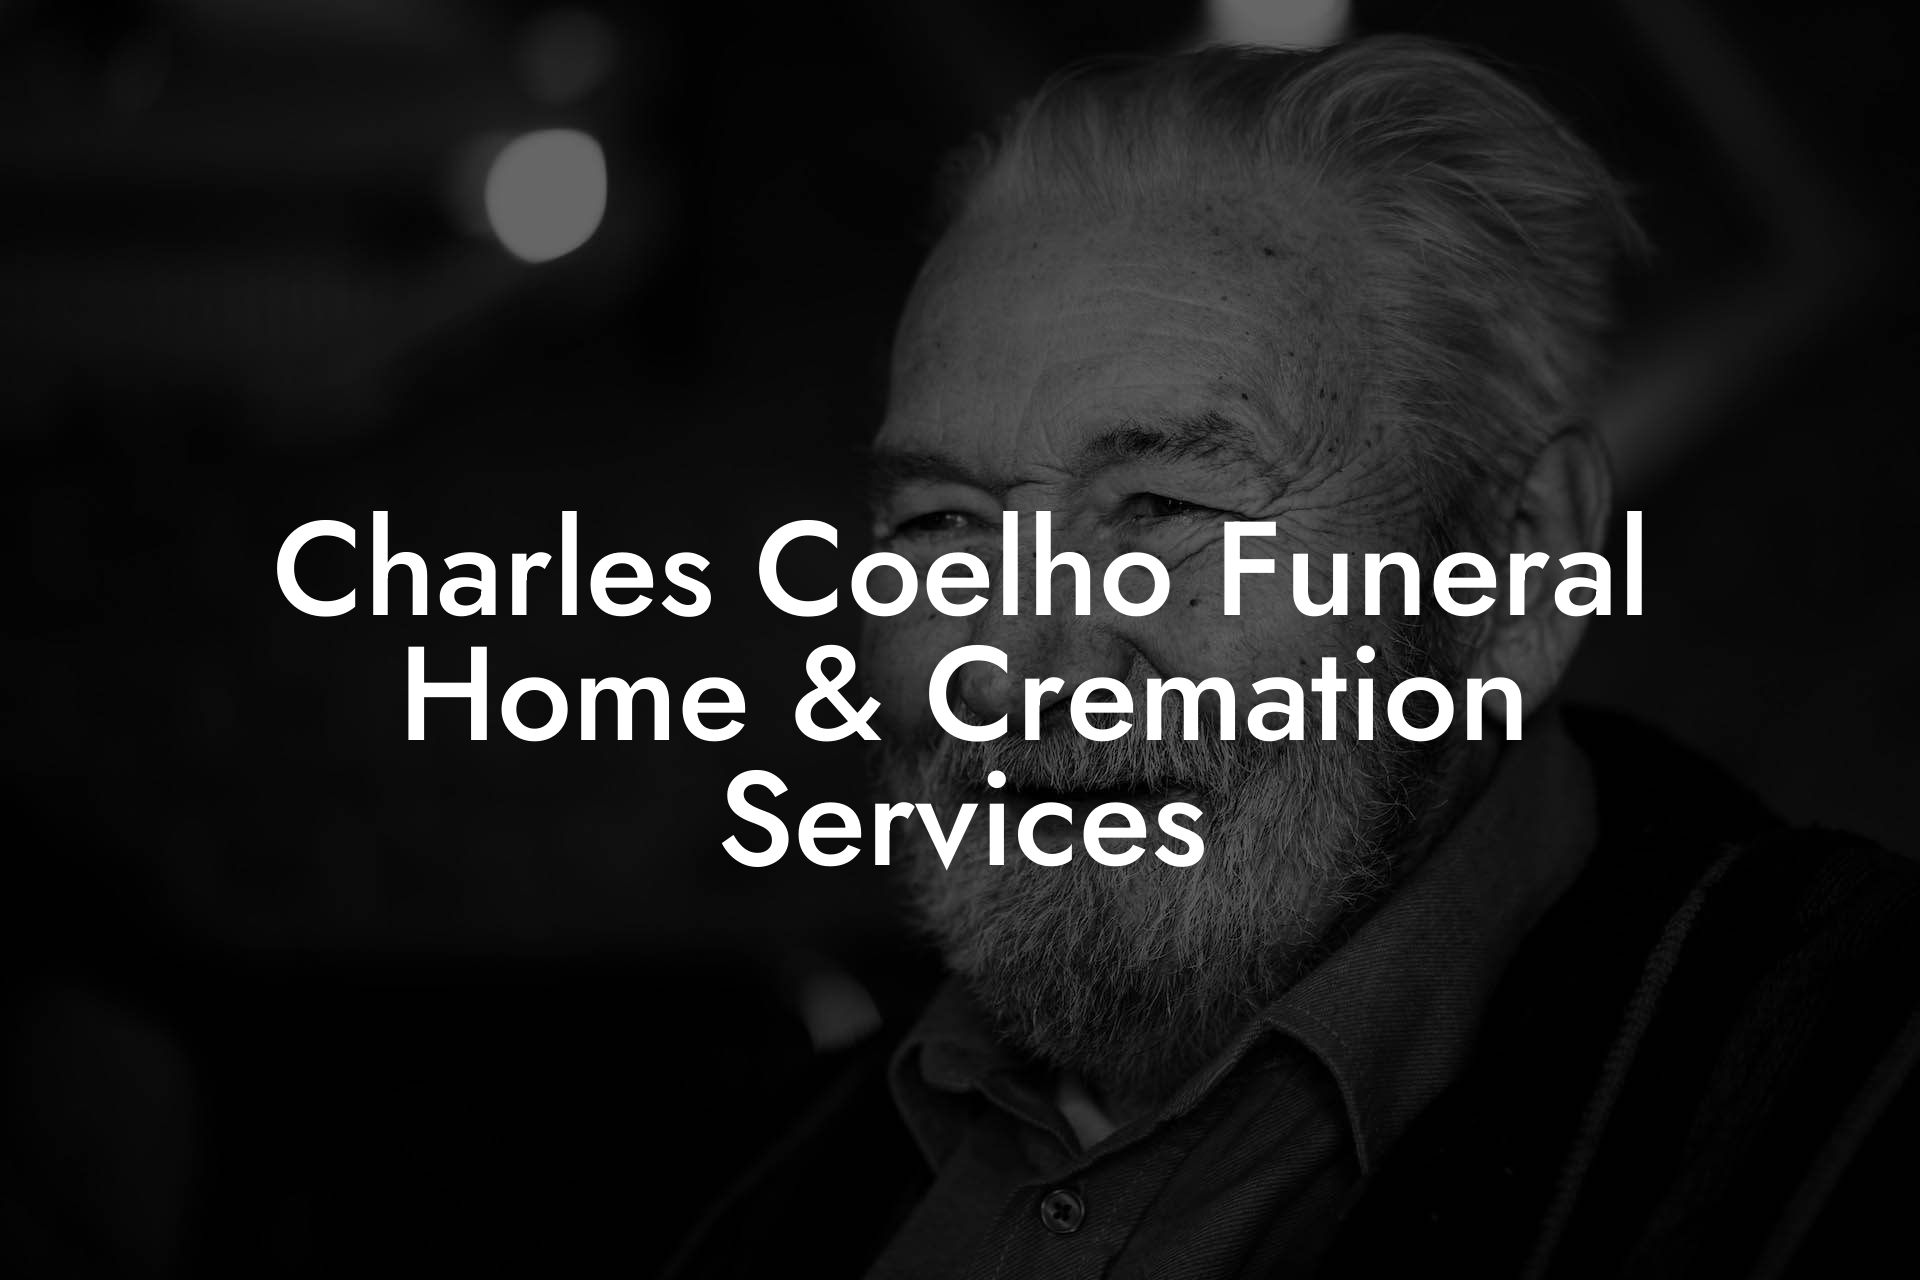 Charles Coelho Funeral Home & Cremation Services